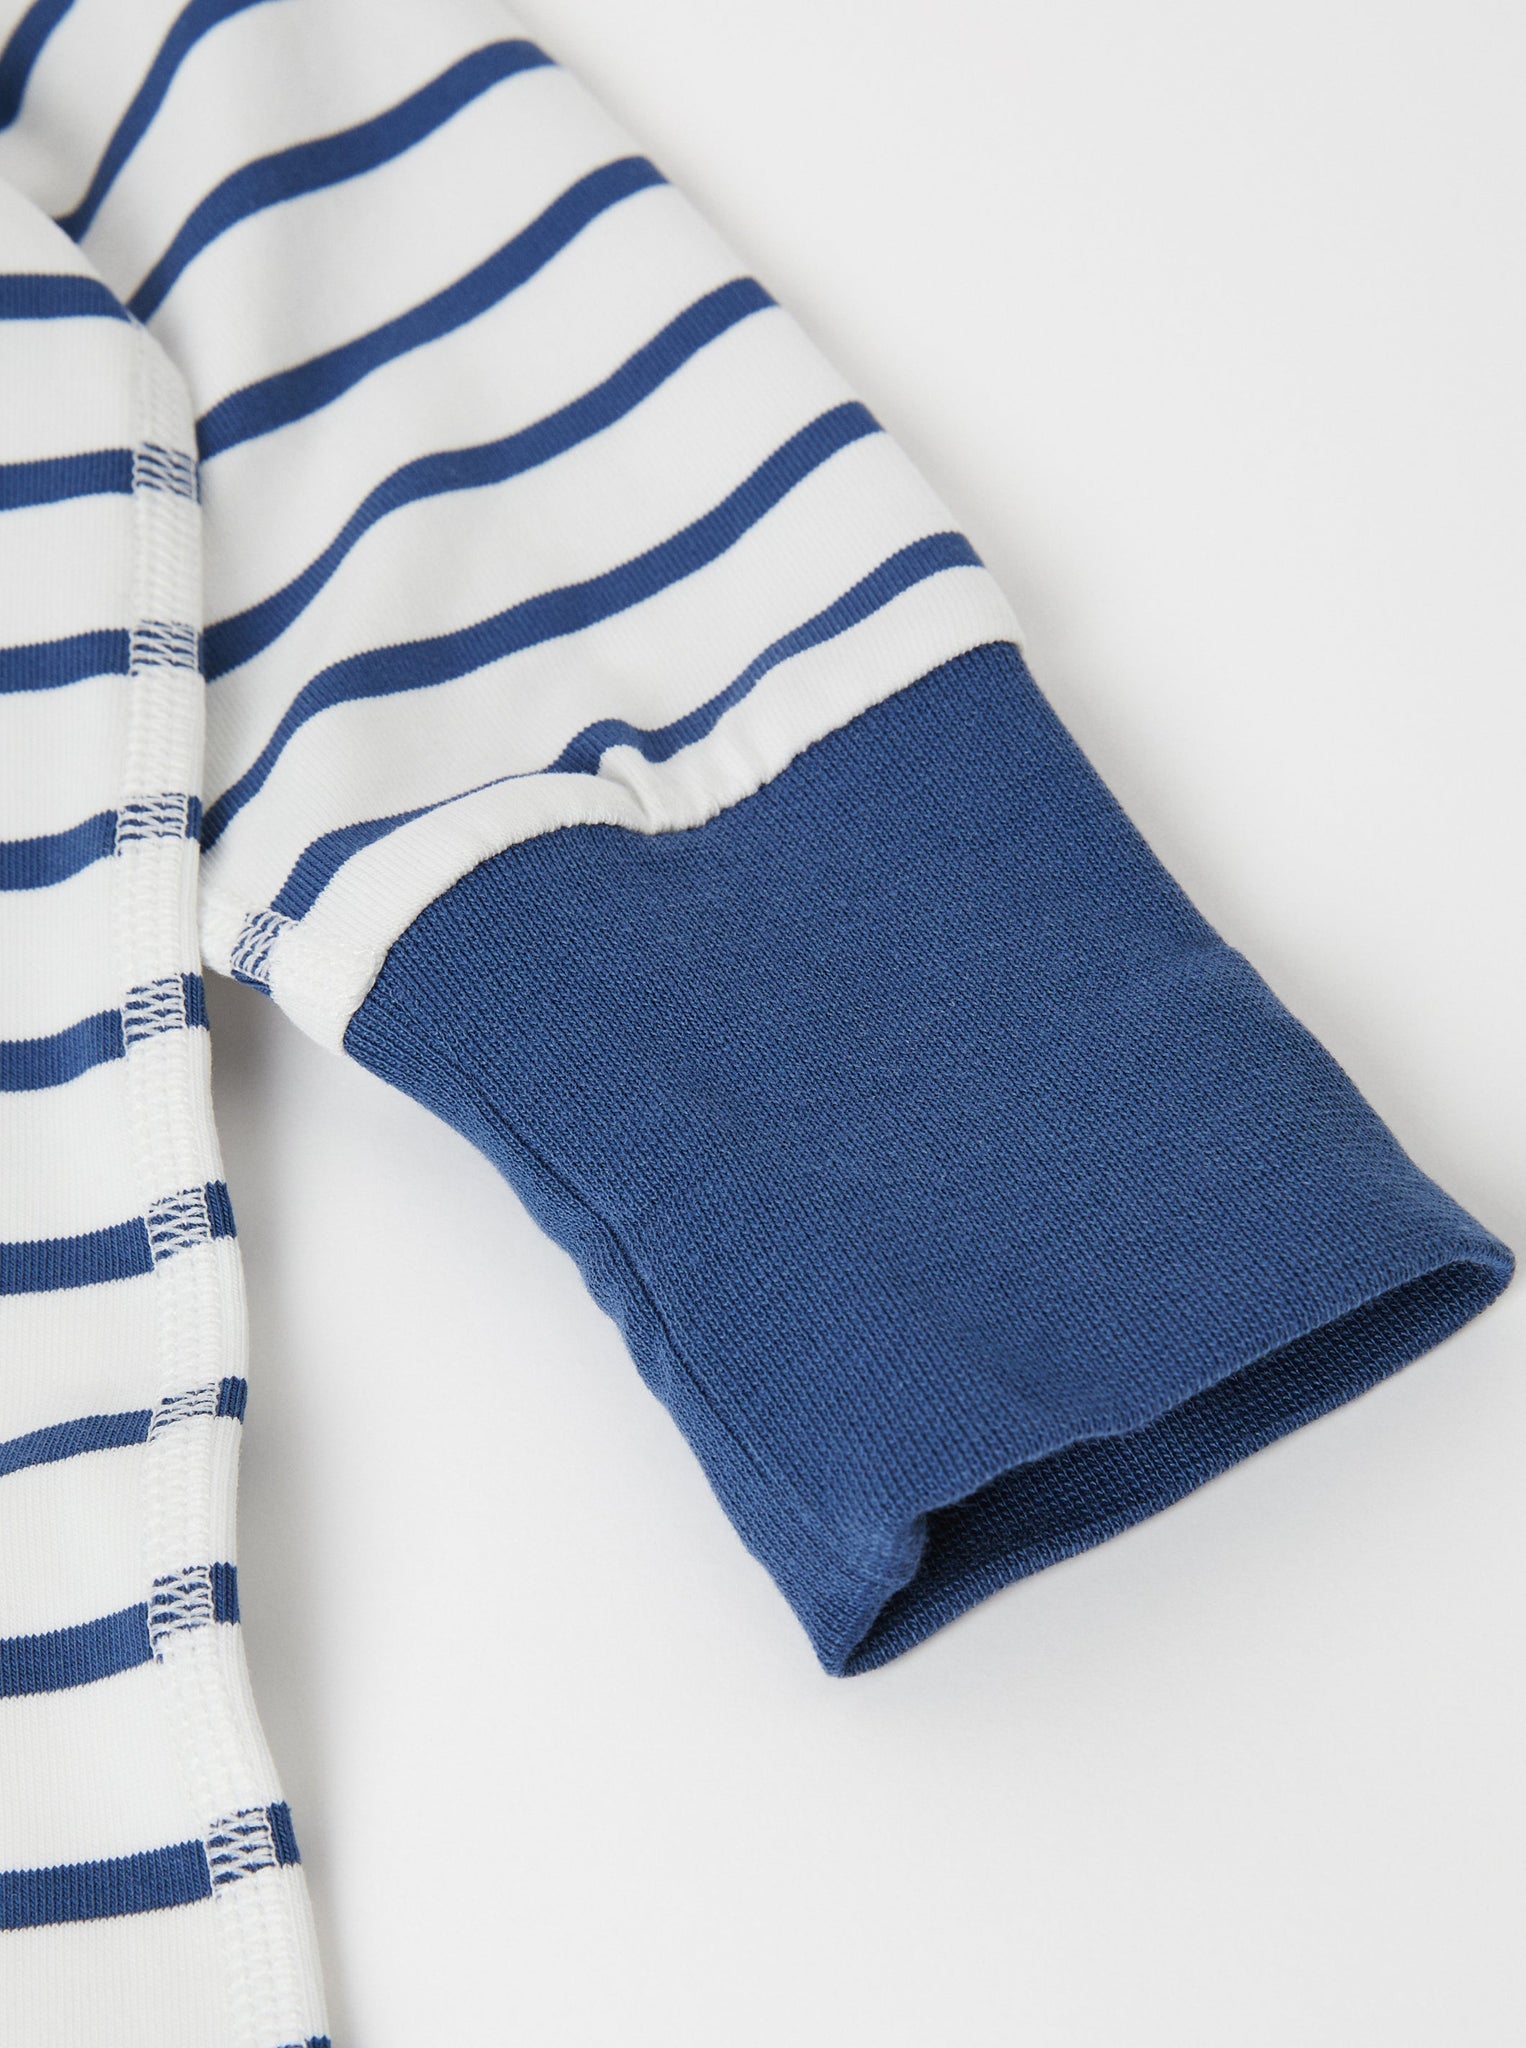 Organic Cotton Striped Baby Sleepsuit from the Polarn O. Pyret babywear collection. Ethically produced kids clothing.